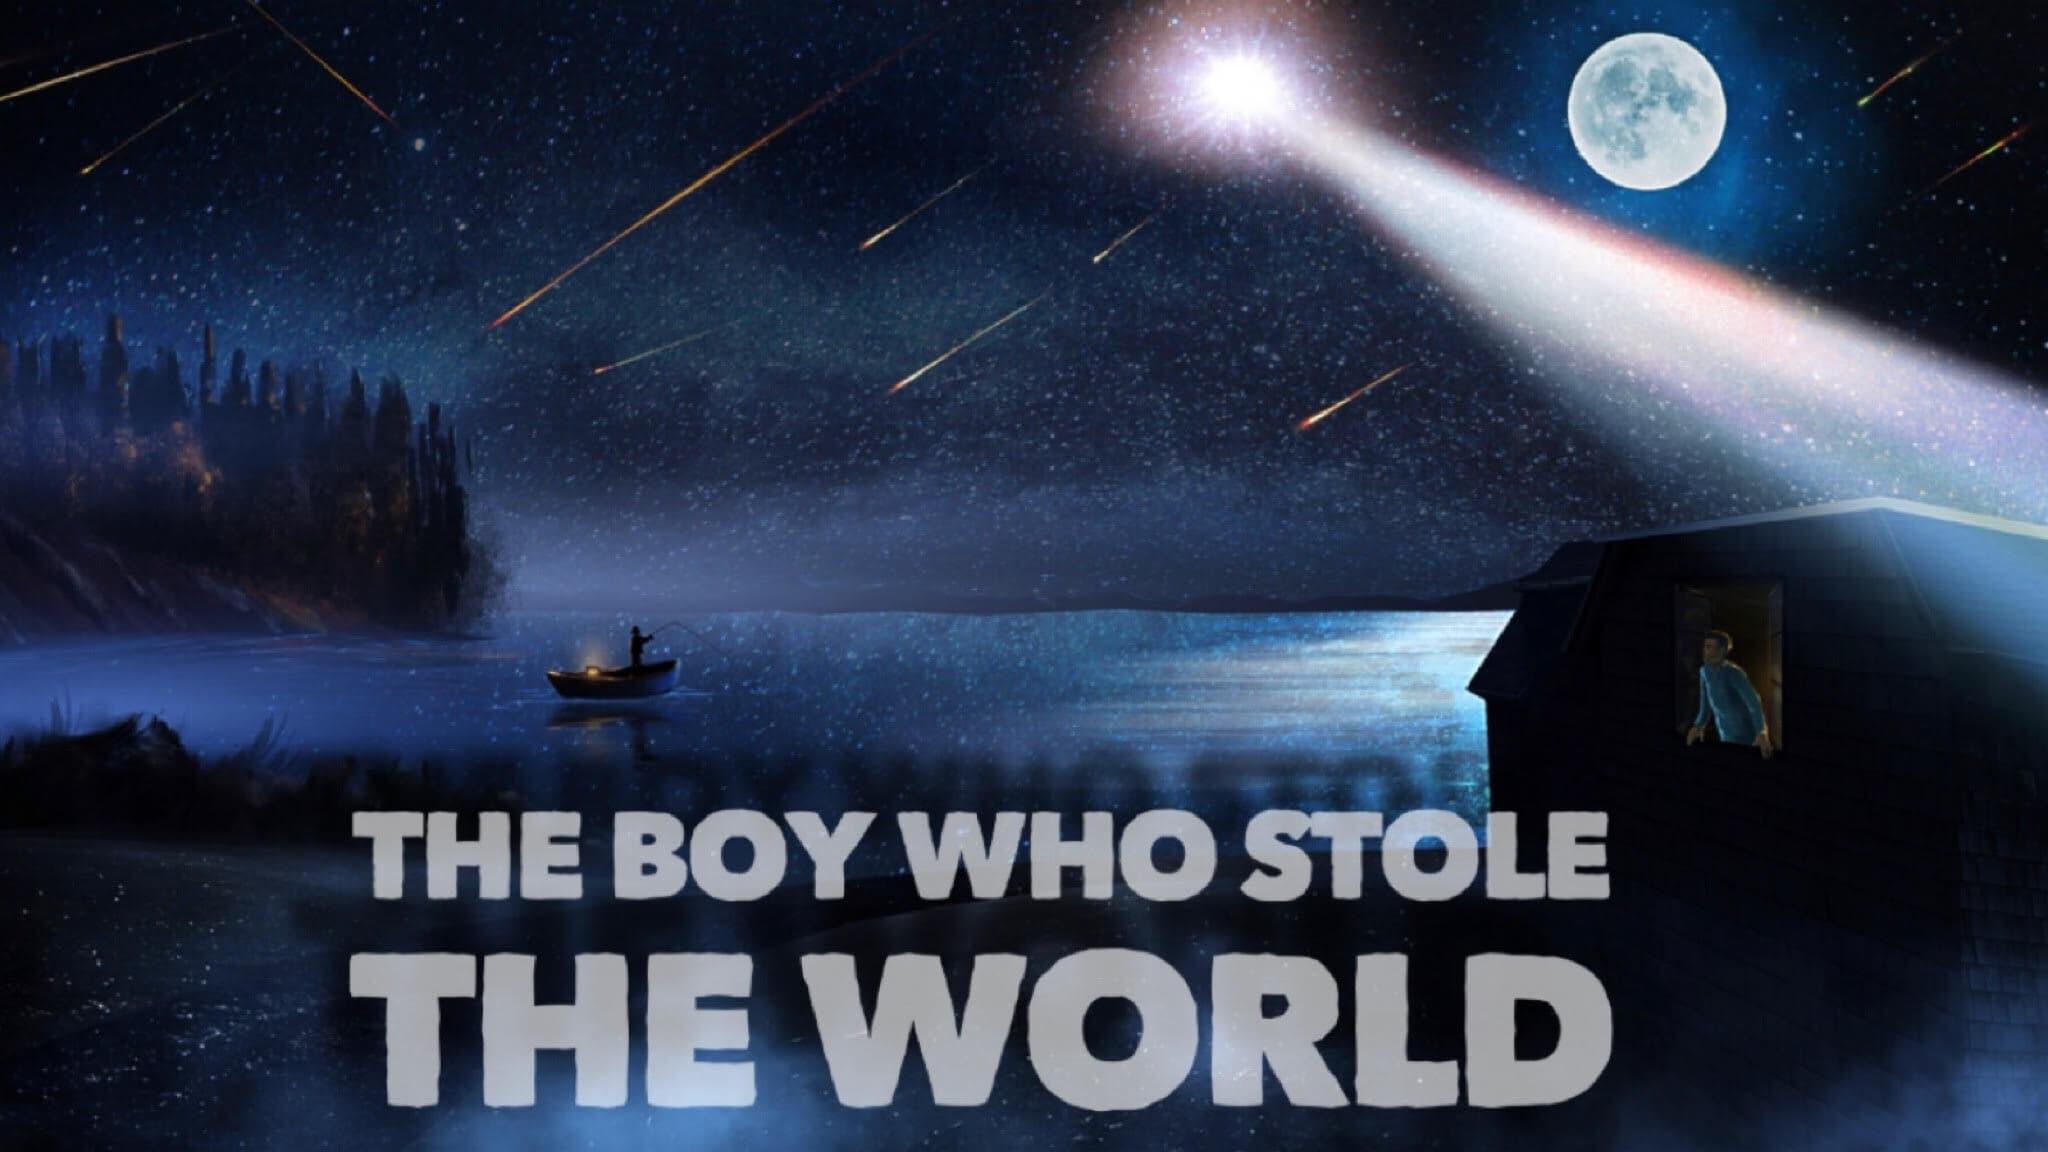 The Boy Who Stole the World backdrop